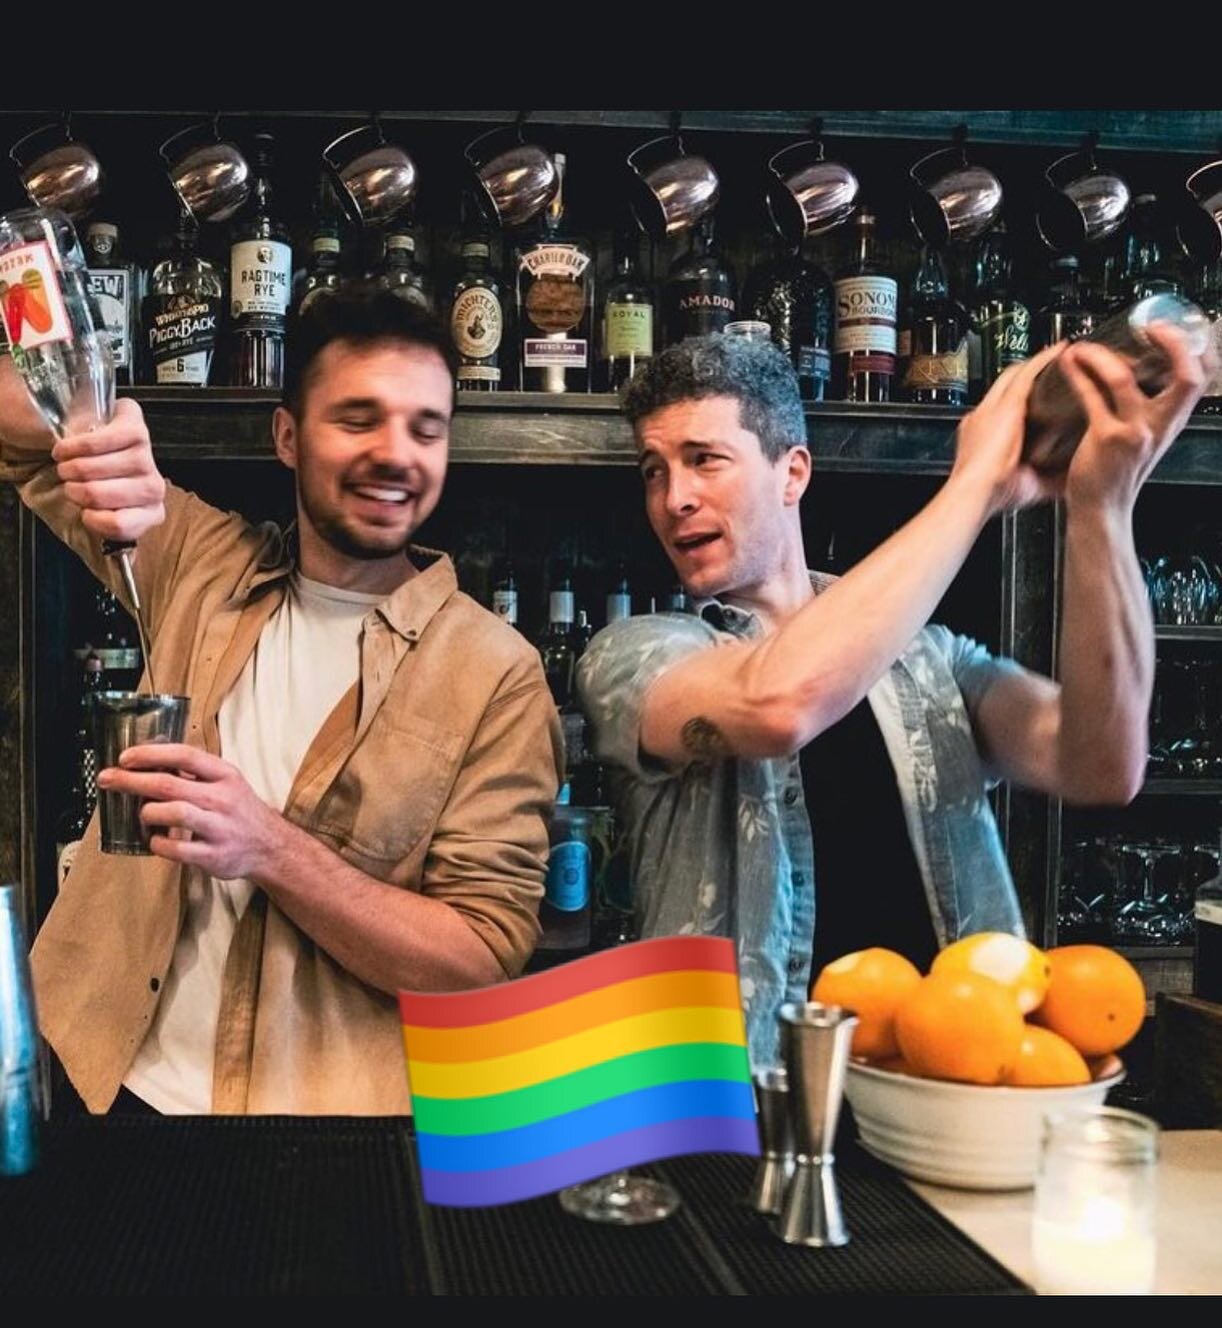 Happy Pride!!! If you&rsquo;re out and about today come hang. Also it&rsquo;s the last night these two will be behind the bar together as Marty is moving on to explore greener pastures. Come by for a Pina Colada and wish him well. 

#pridemonth #prid